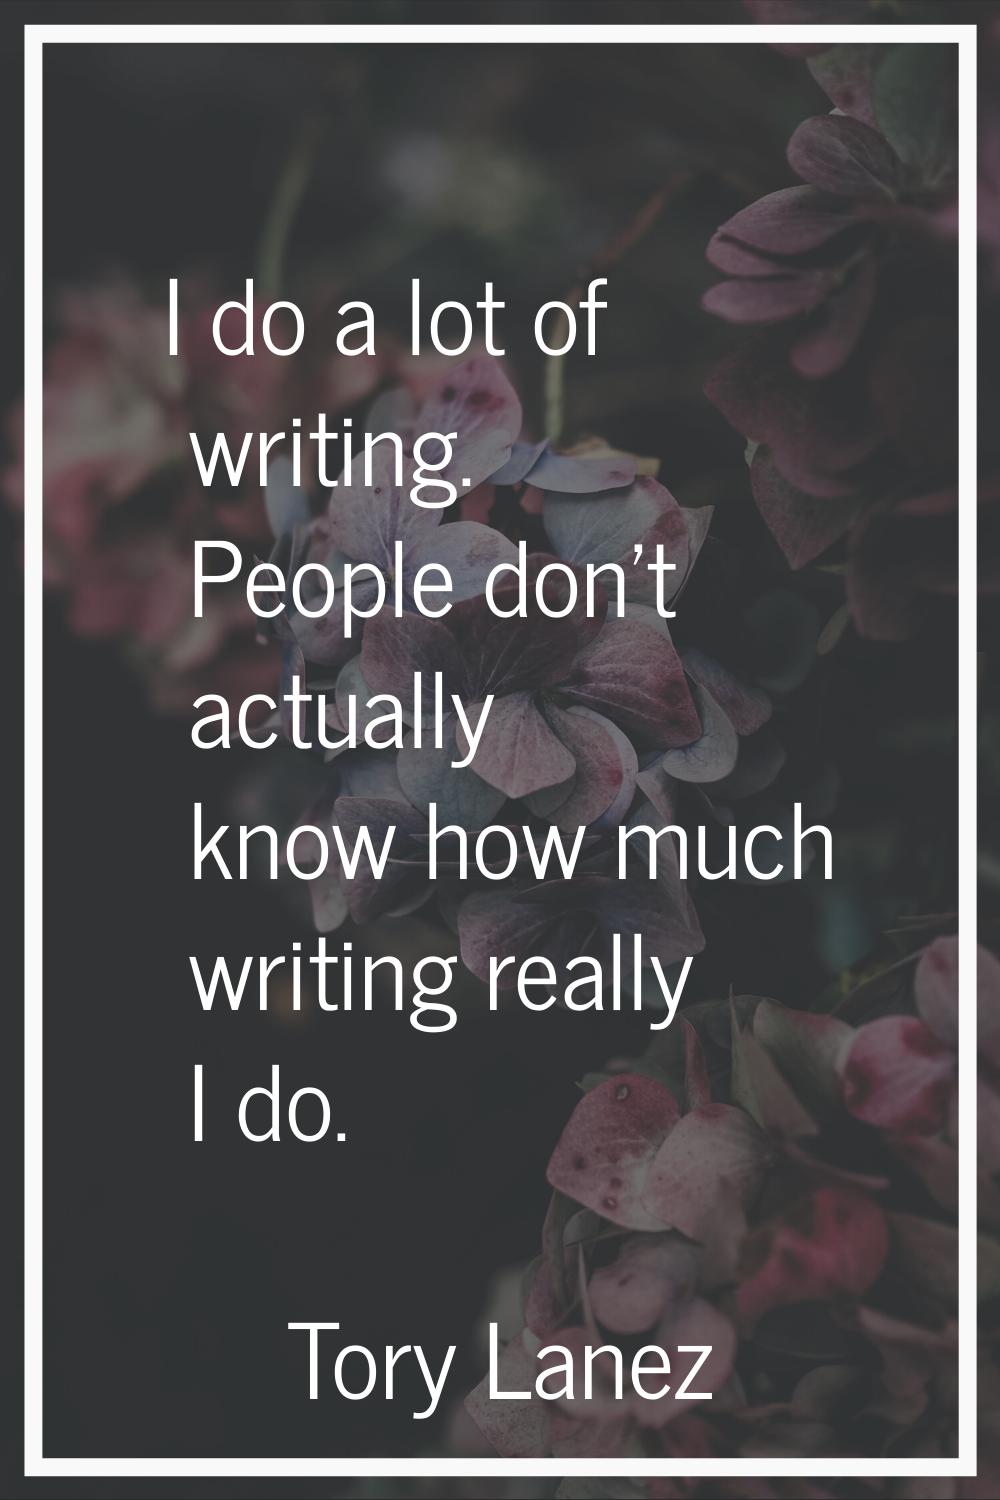 I do a lot of writing. People don't actually know how much writing really I do.